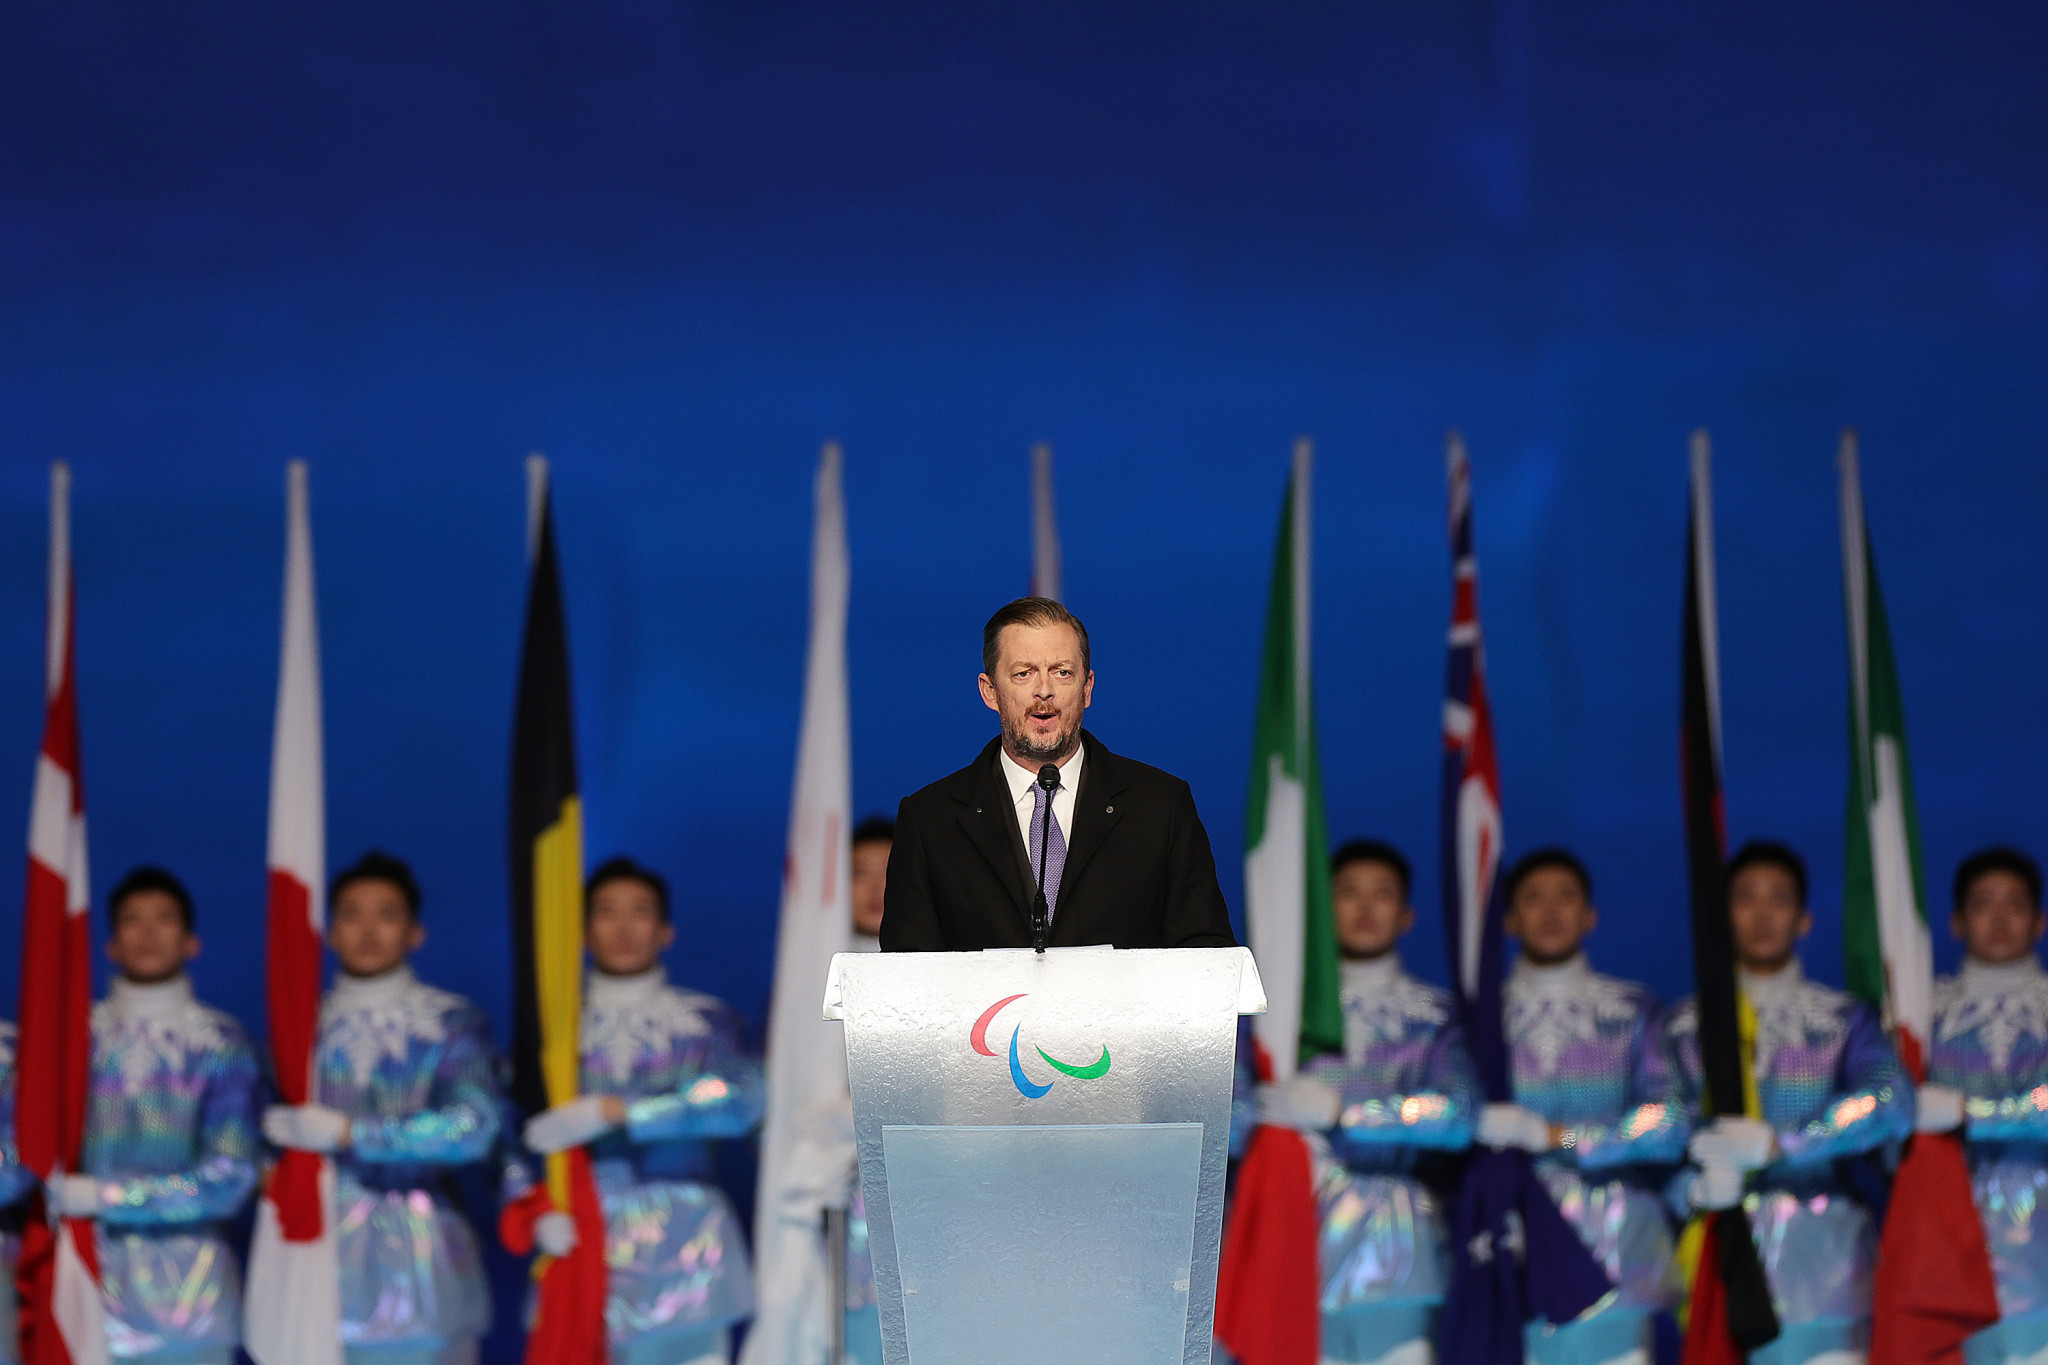 International Paralympic Committee President Andrew Parsons made an emotional plea for peace at the Beijing 2022 Winter Paralympic Games ©Getty Images